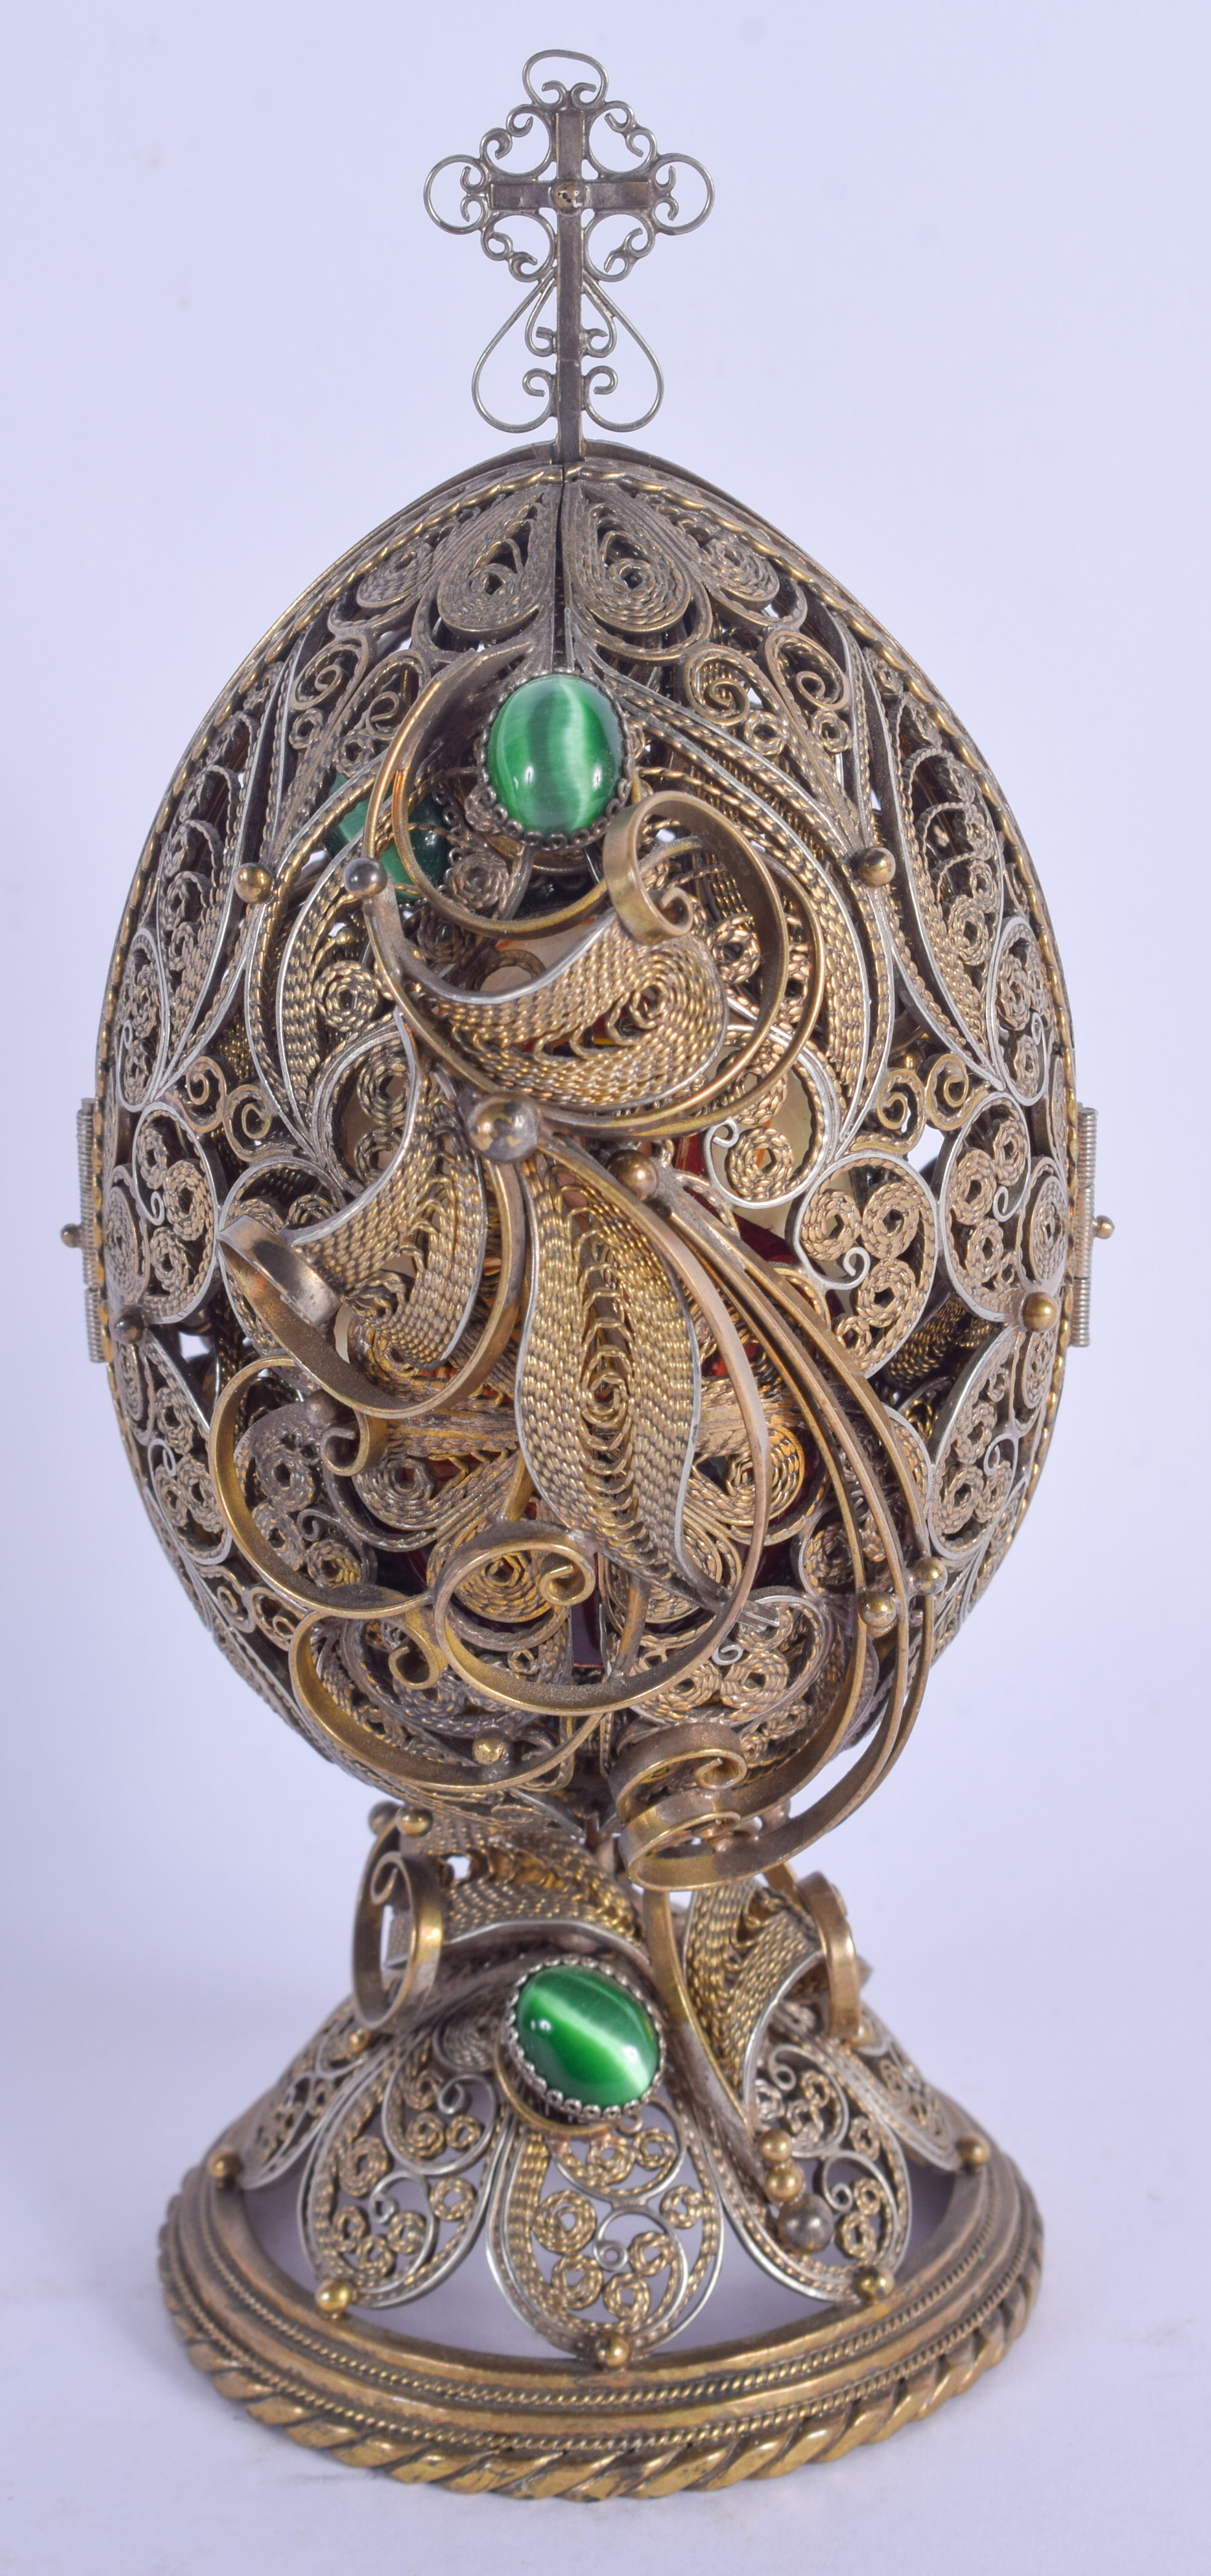 AN EARLY 20TH CENTURY RUSSIAN SILVER GILT JEWELLED EGG revealing a religious icon. 213 grams. 15 cm